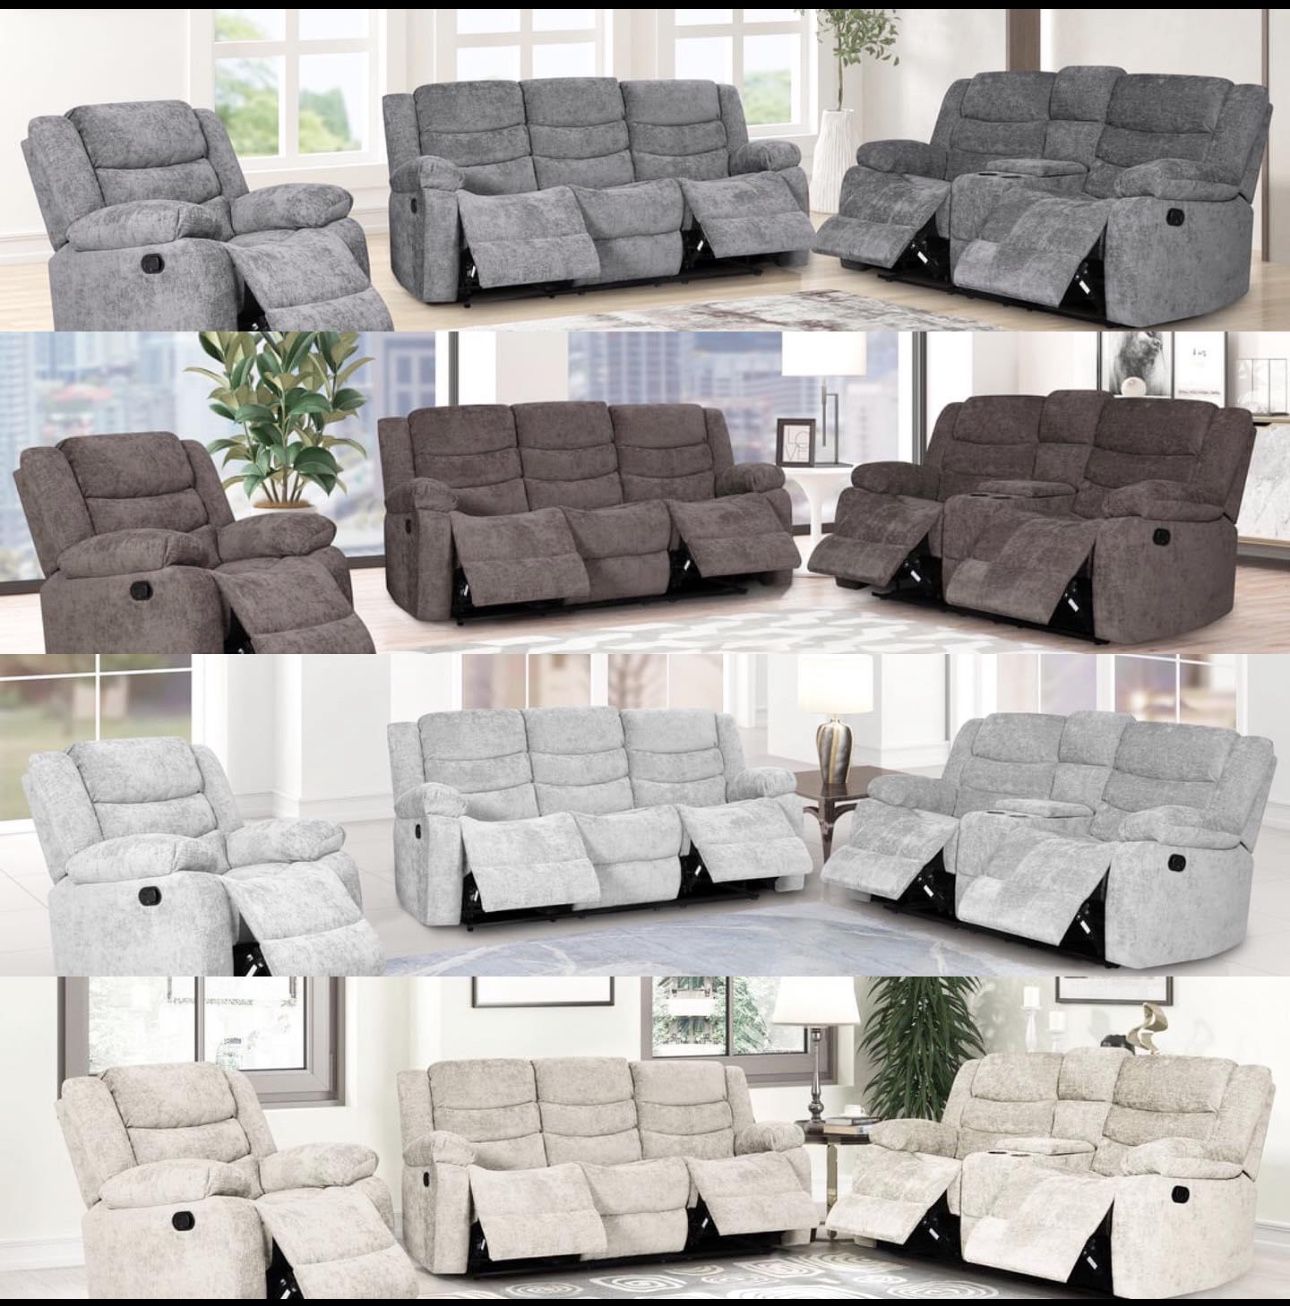 NEW 3pc RECLINING SOFA LOVESEAT WITH RECLINER ONLINE SPECIAL ONLY 